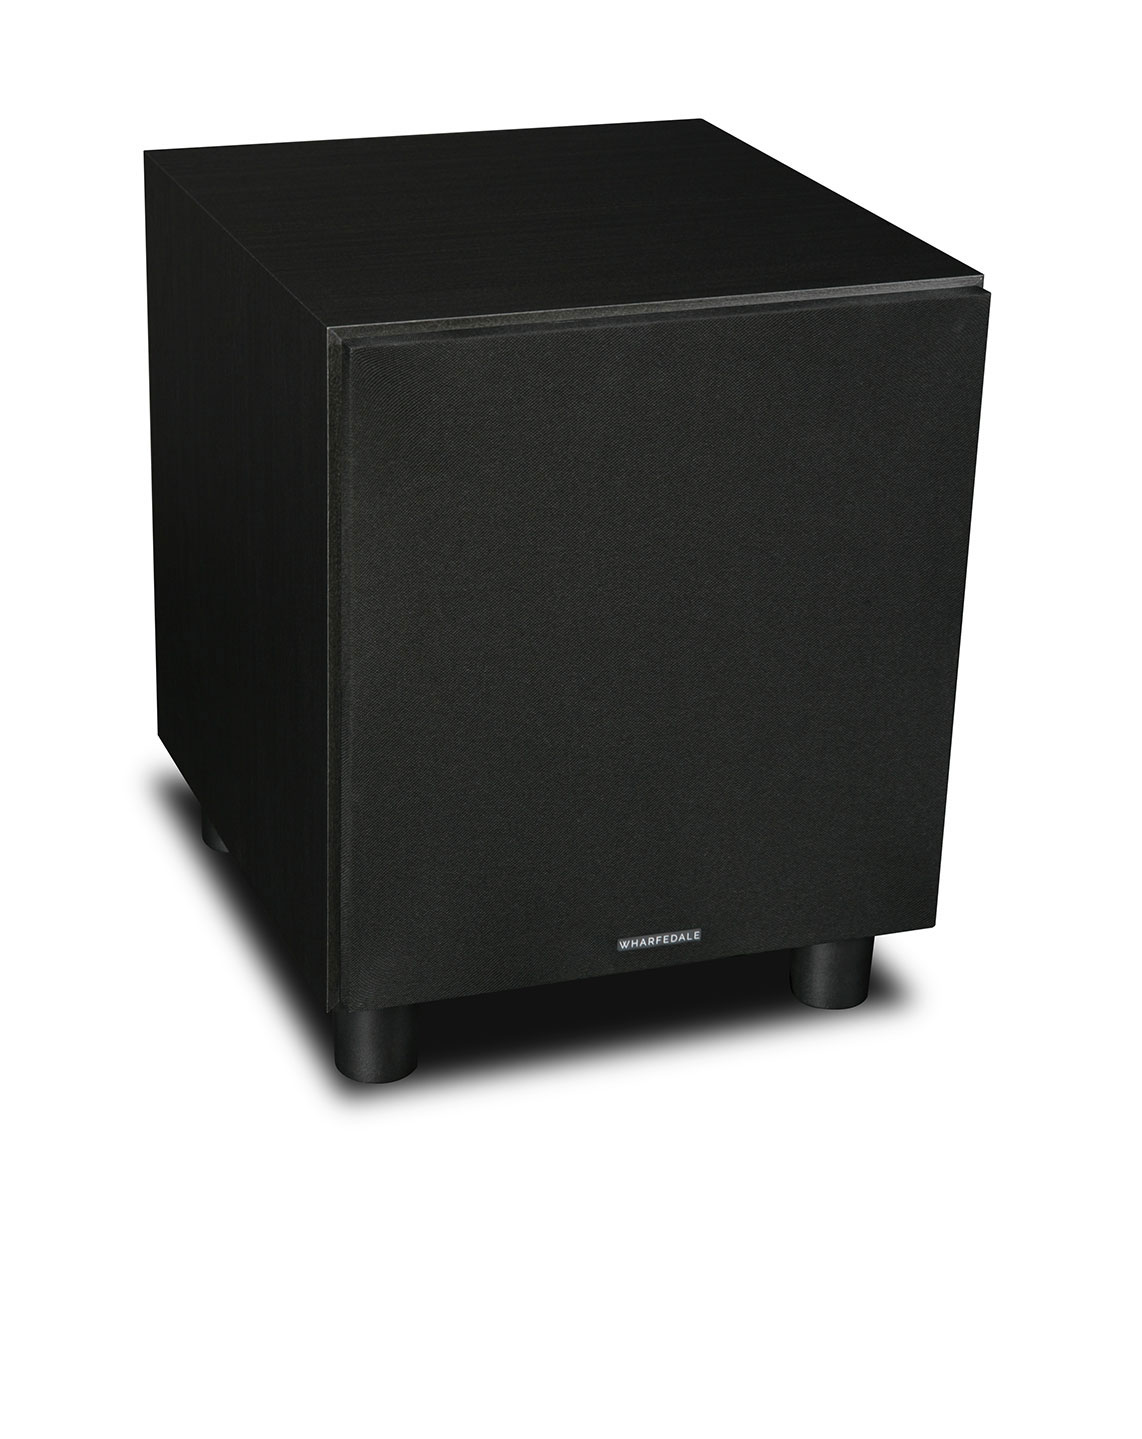 Wharfedale SW-15 Subwoofer